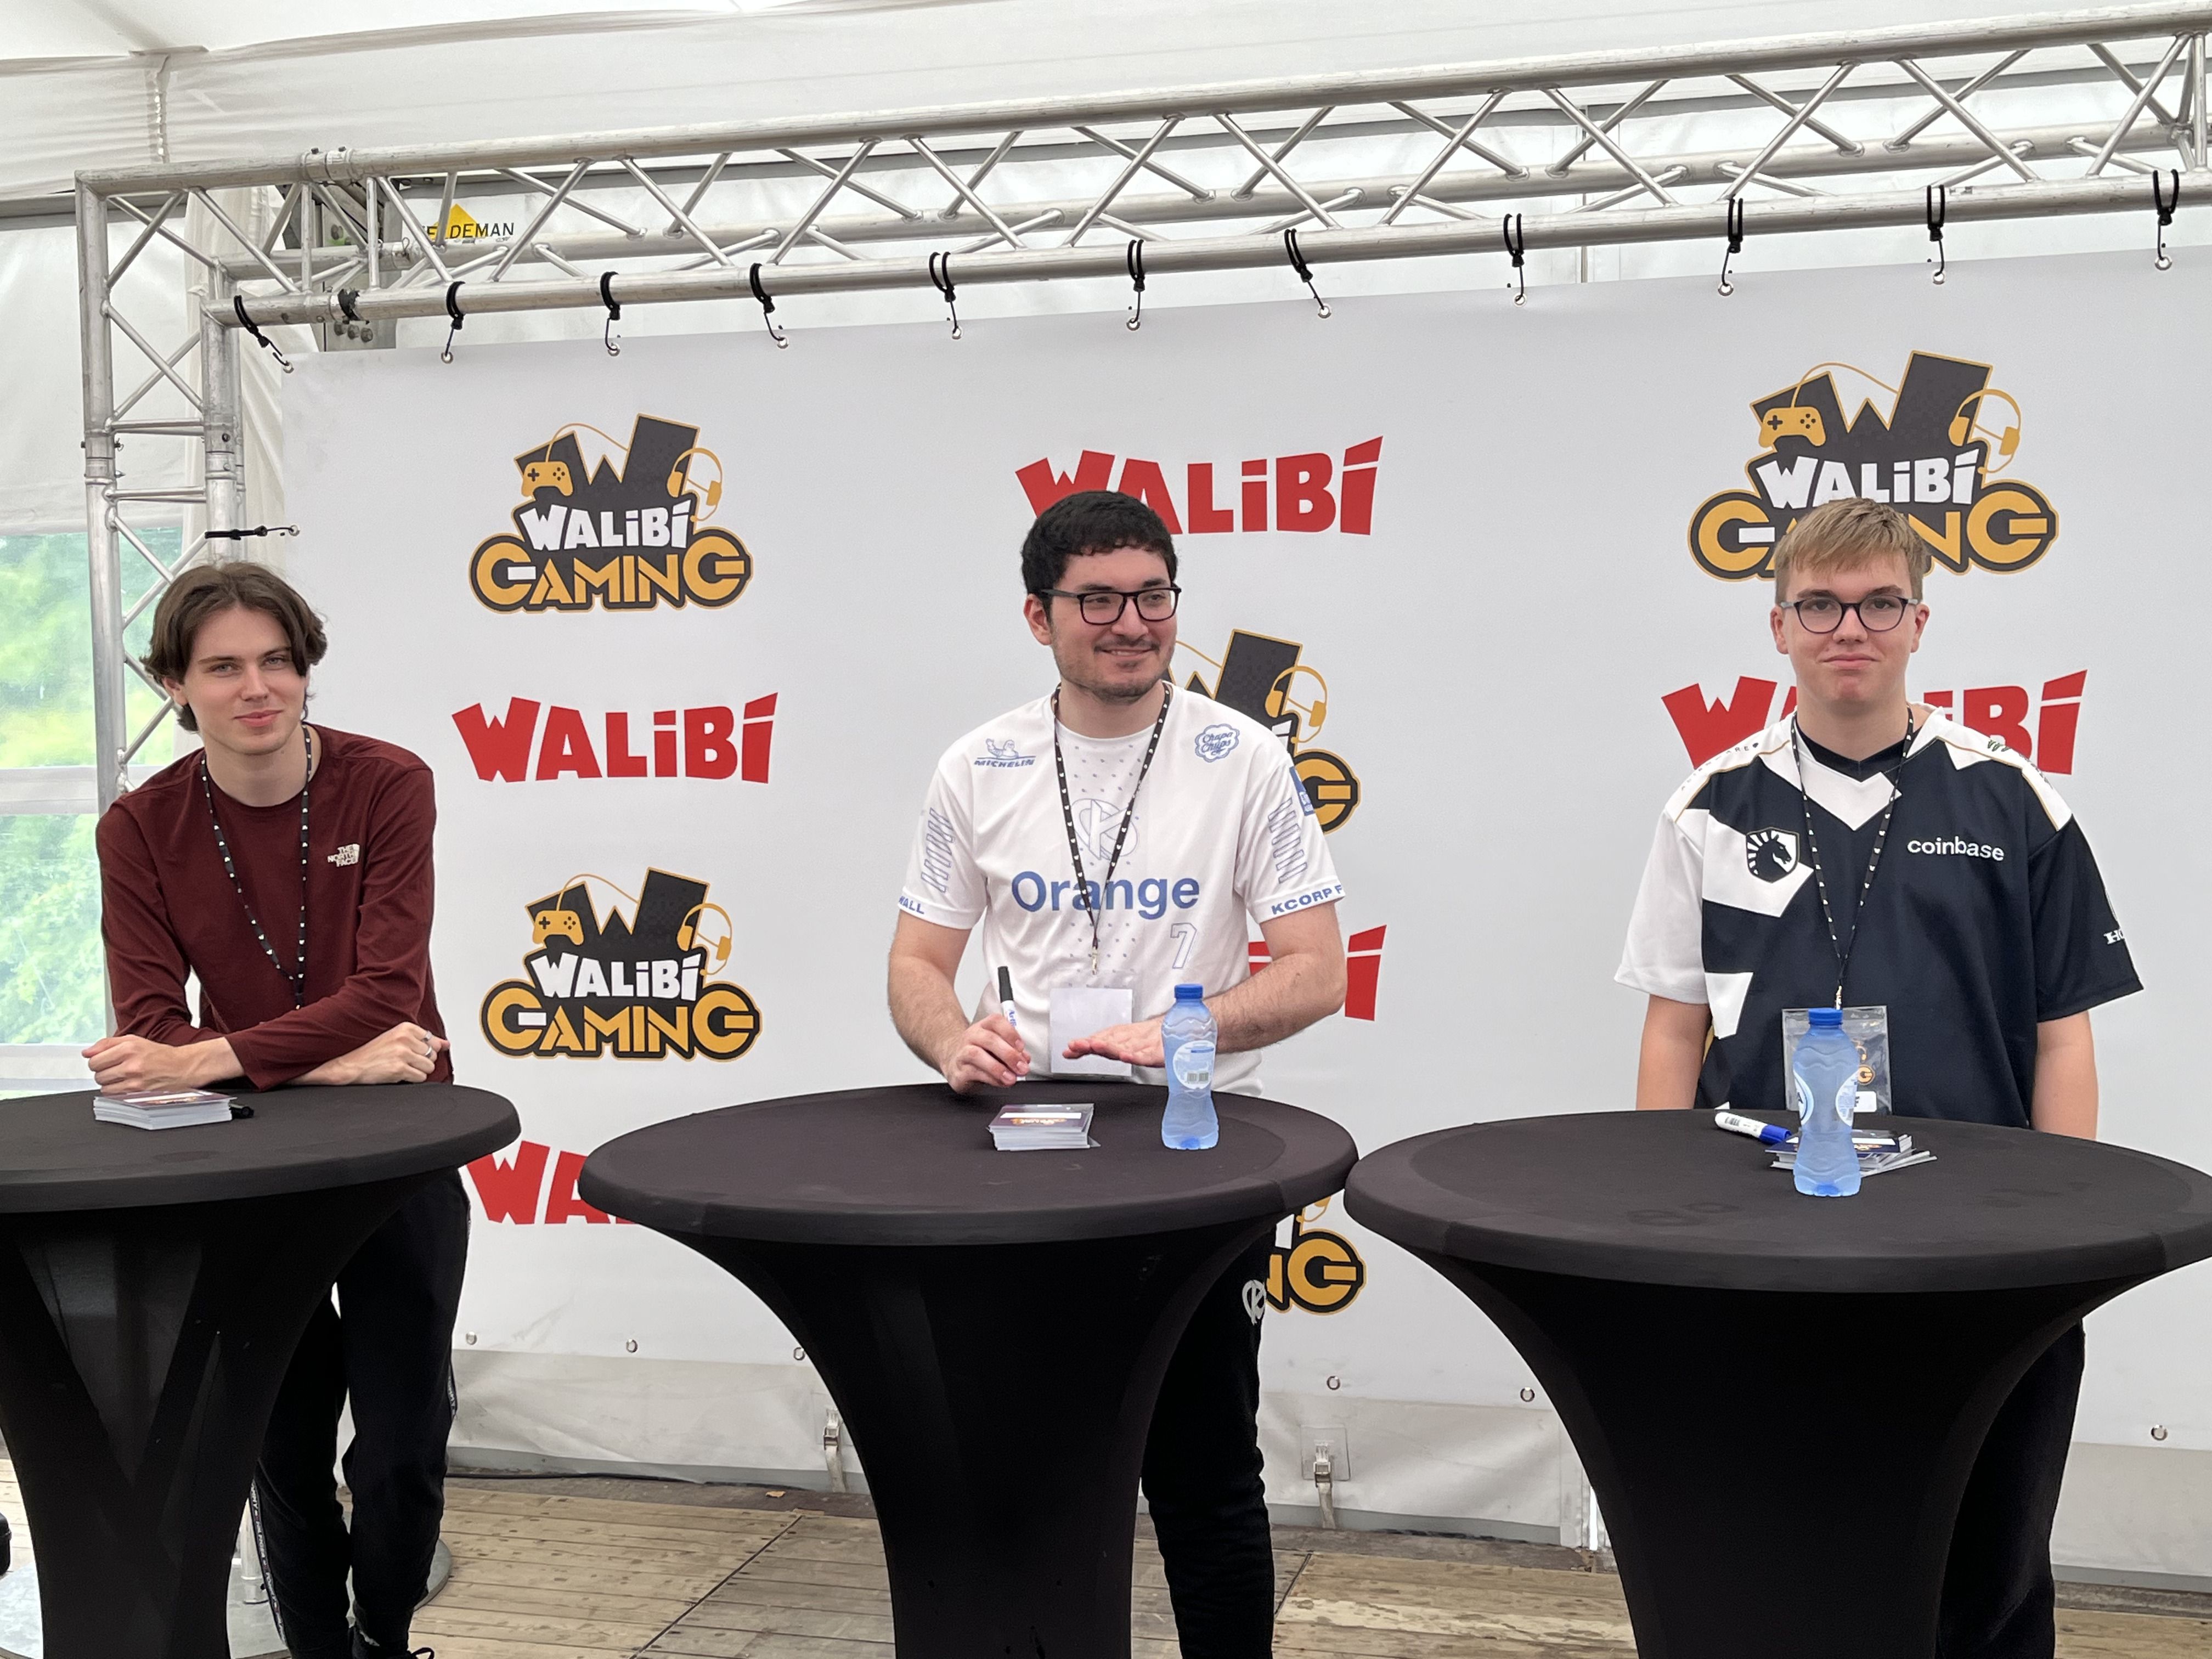 5 prodigies attend the 2022 edition of the Walibi Gaming Event